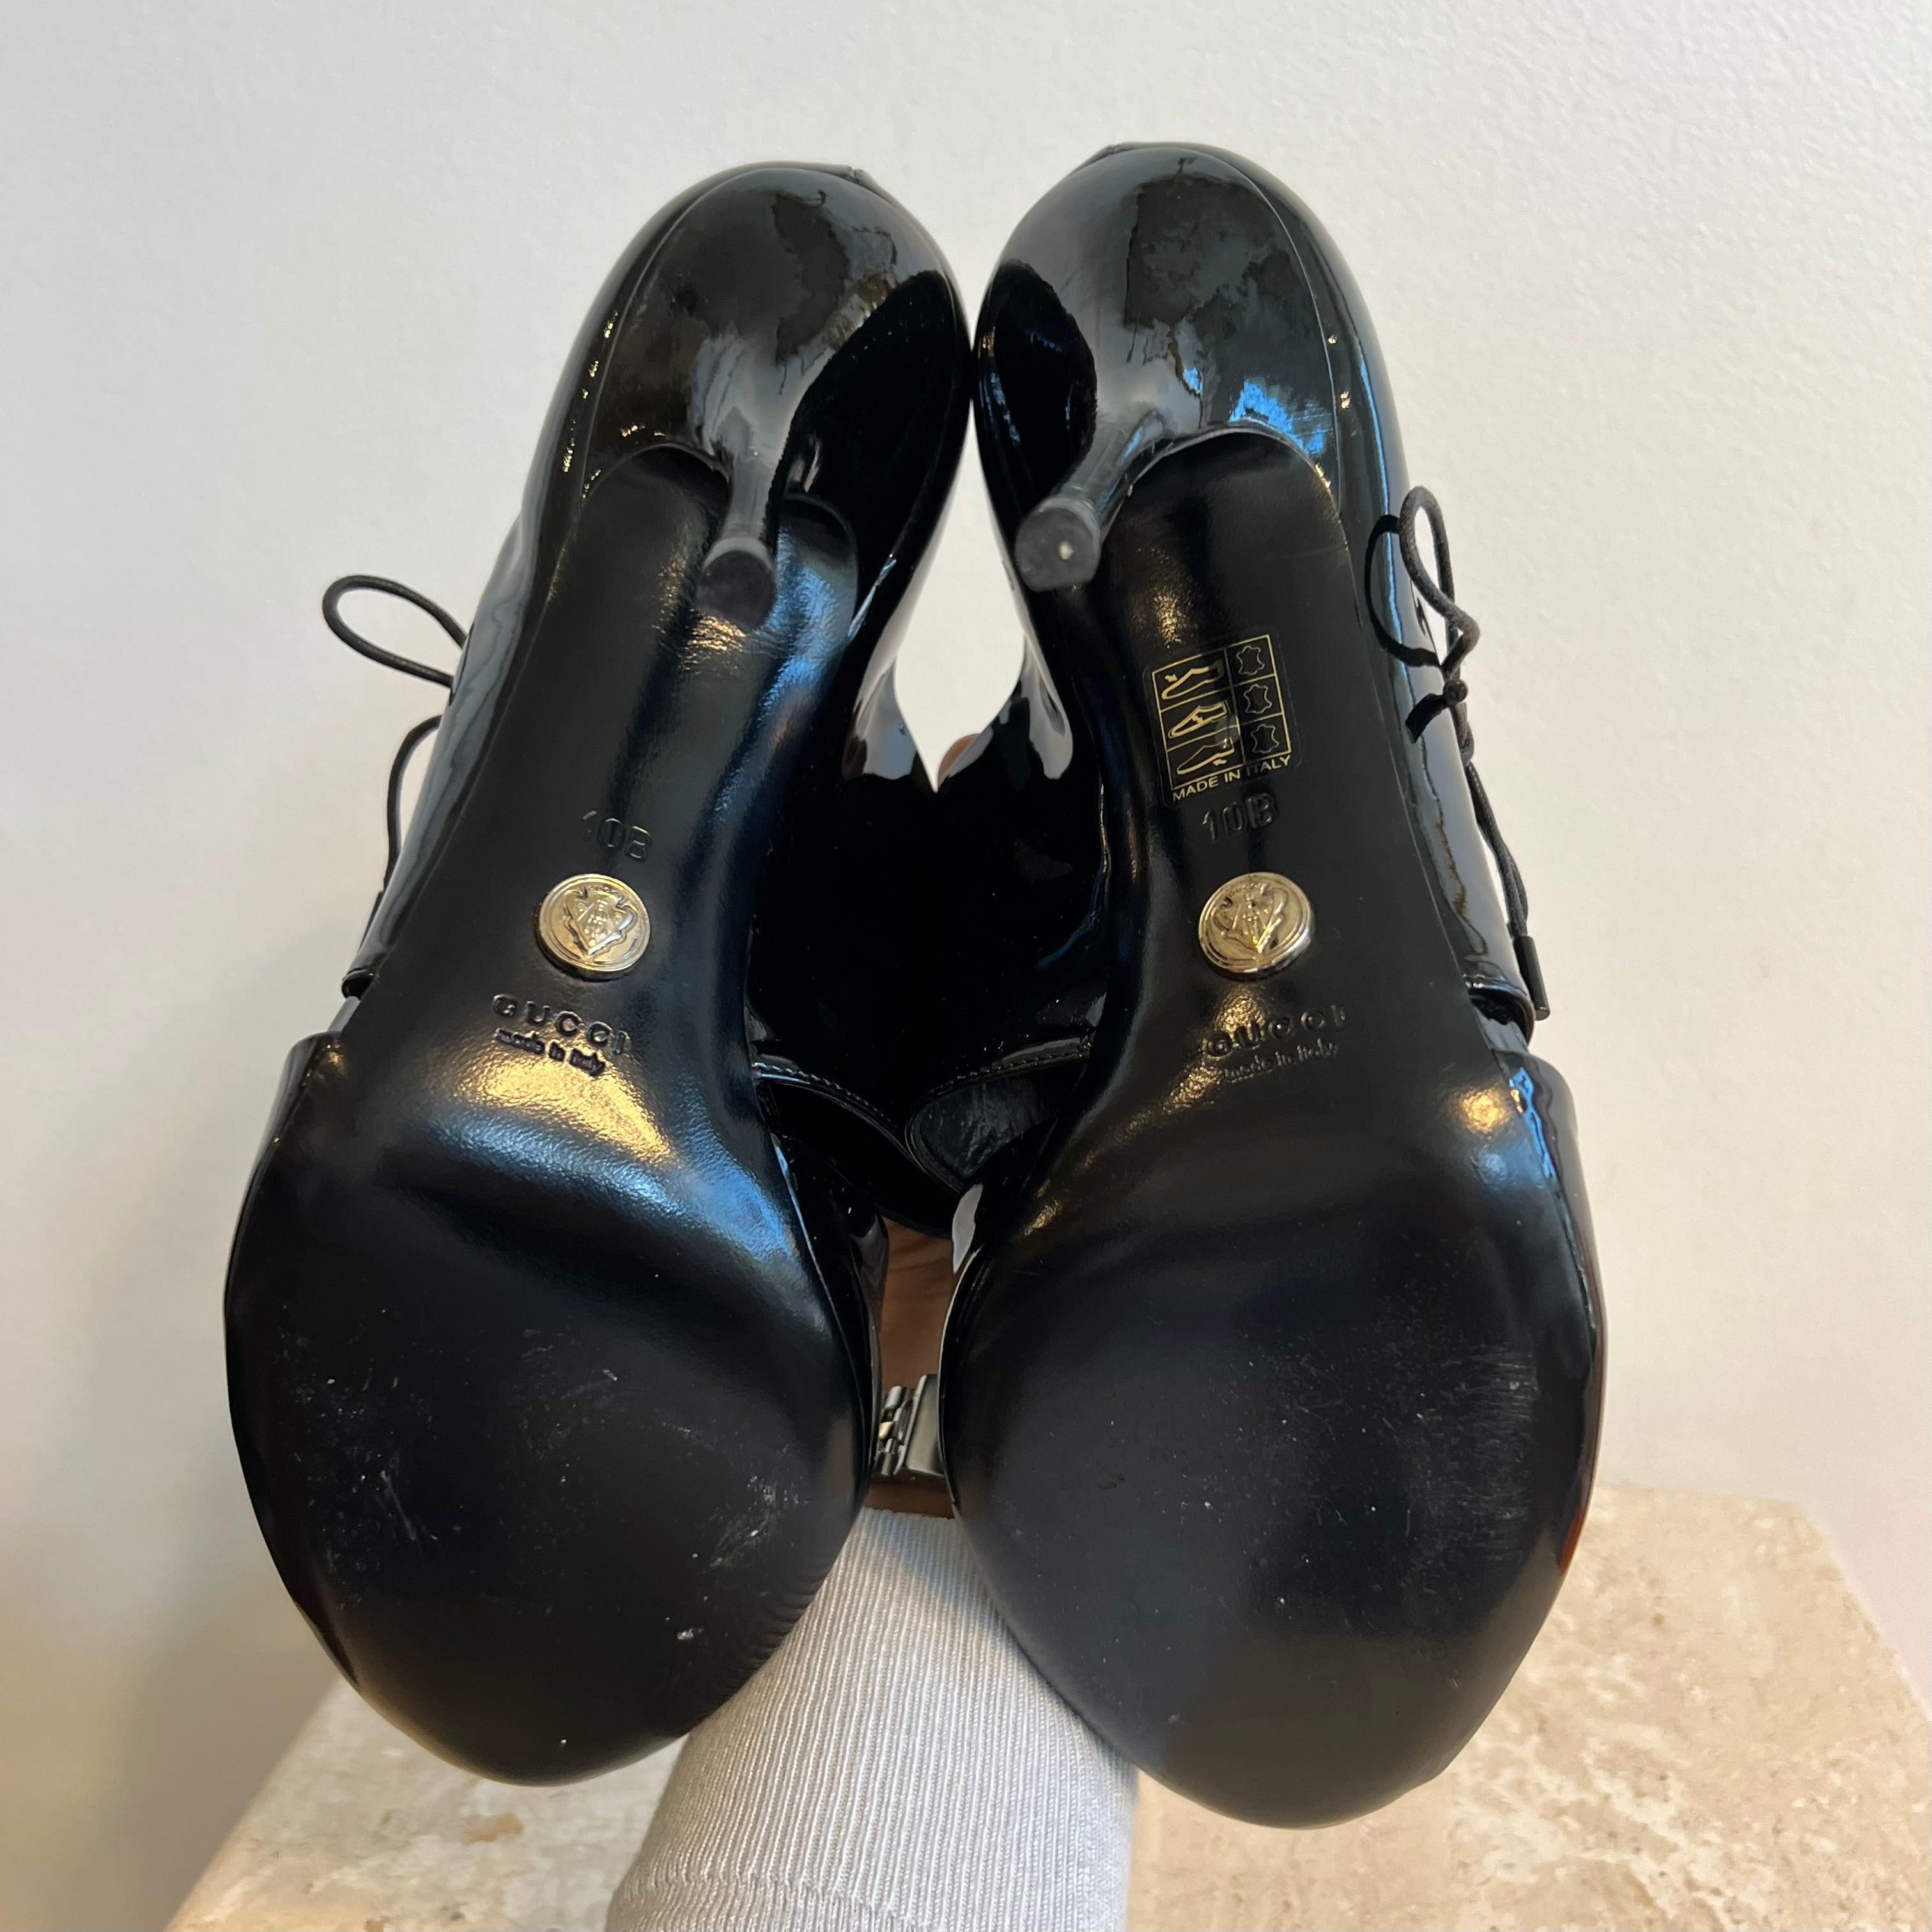 Pre-Owned GUCCI Black Patent Peep Toe Pumps - Size 10